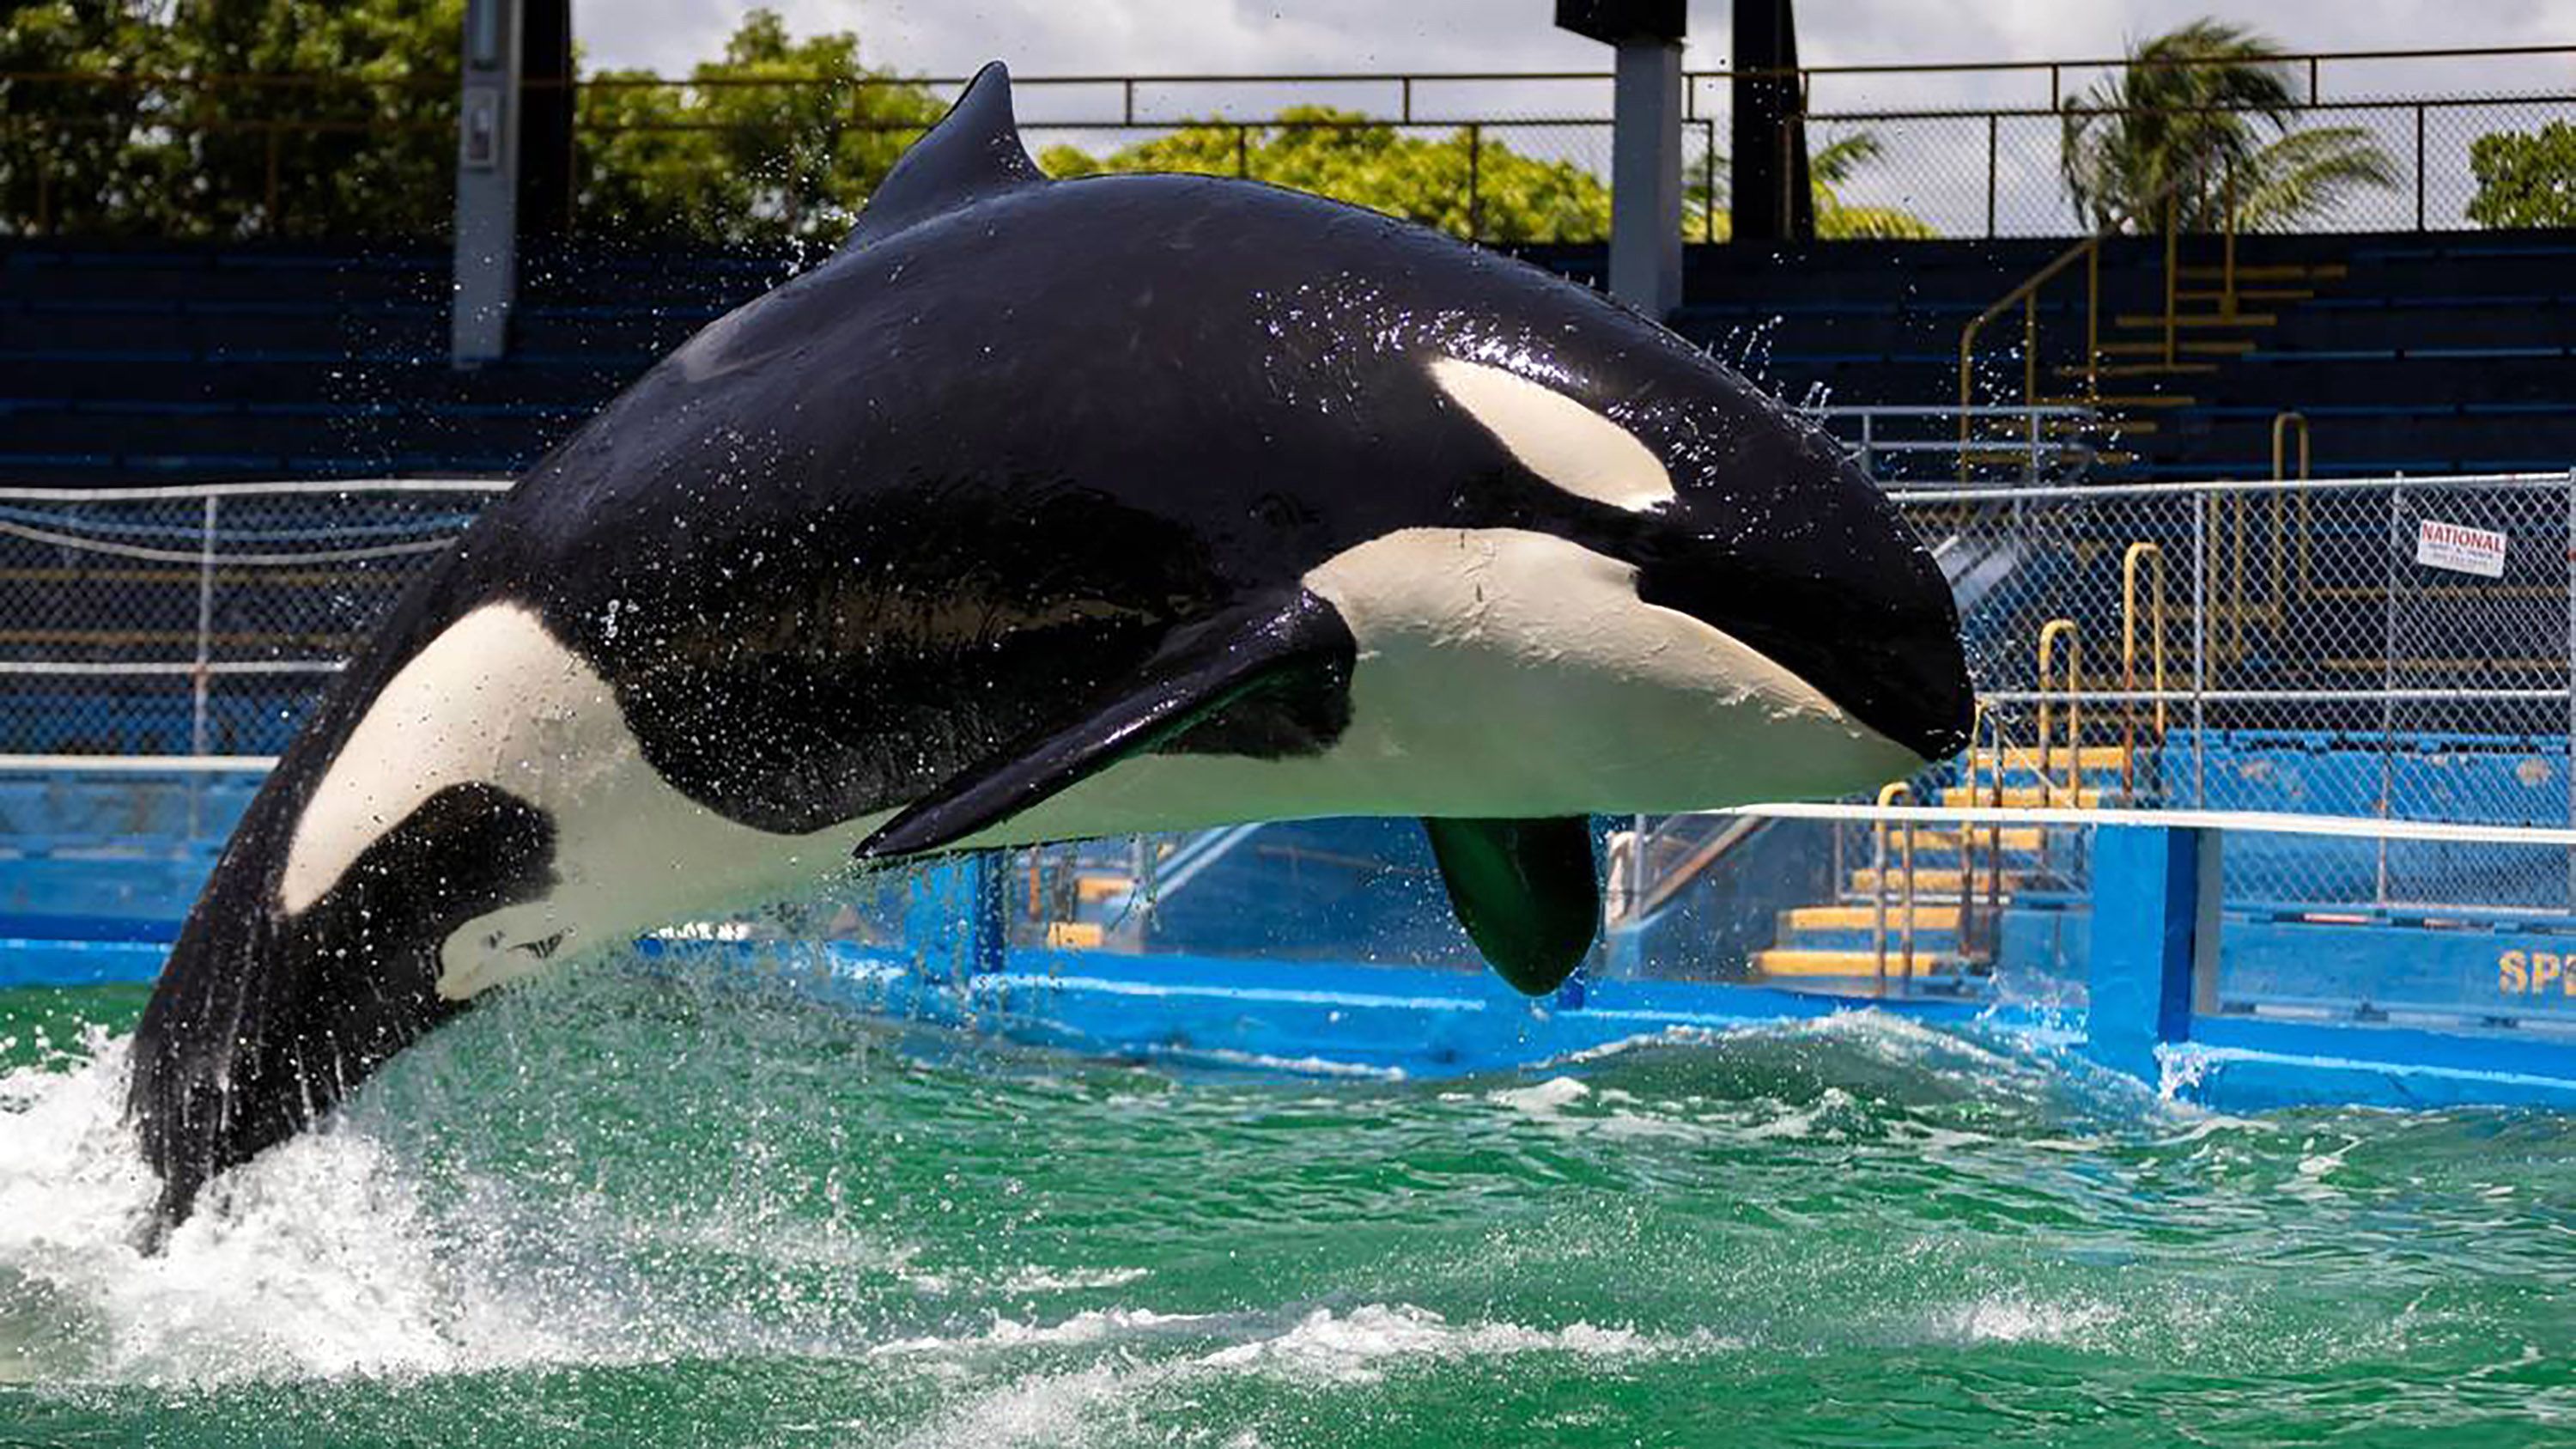 Lolita, a beloved orca at the Miami Seaquarium set to be released into the  ocean, has died